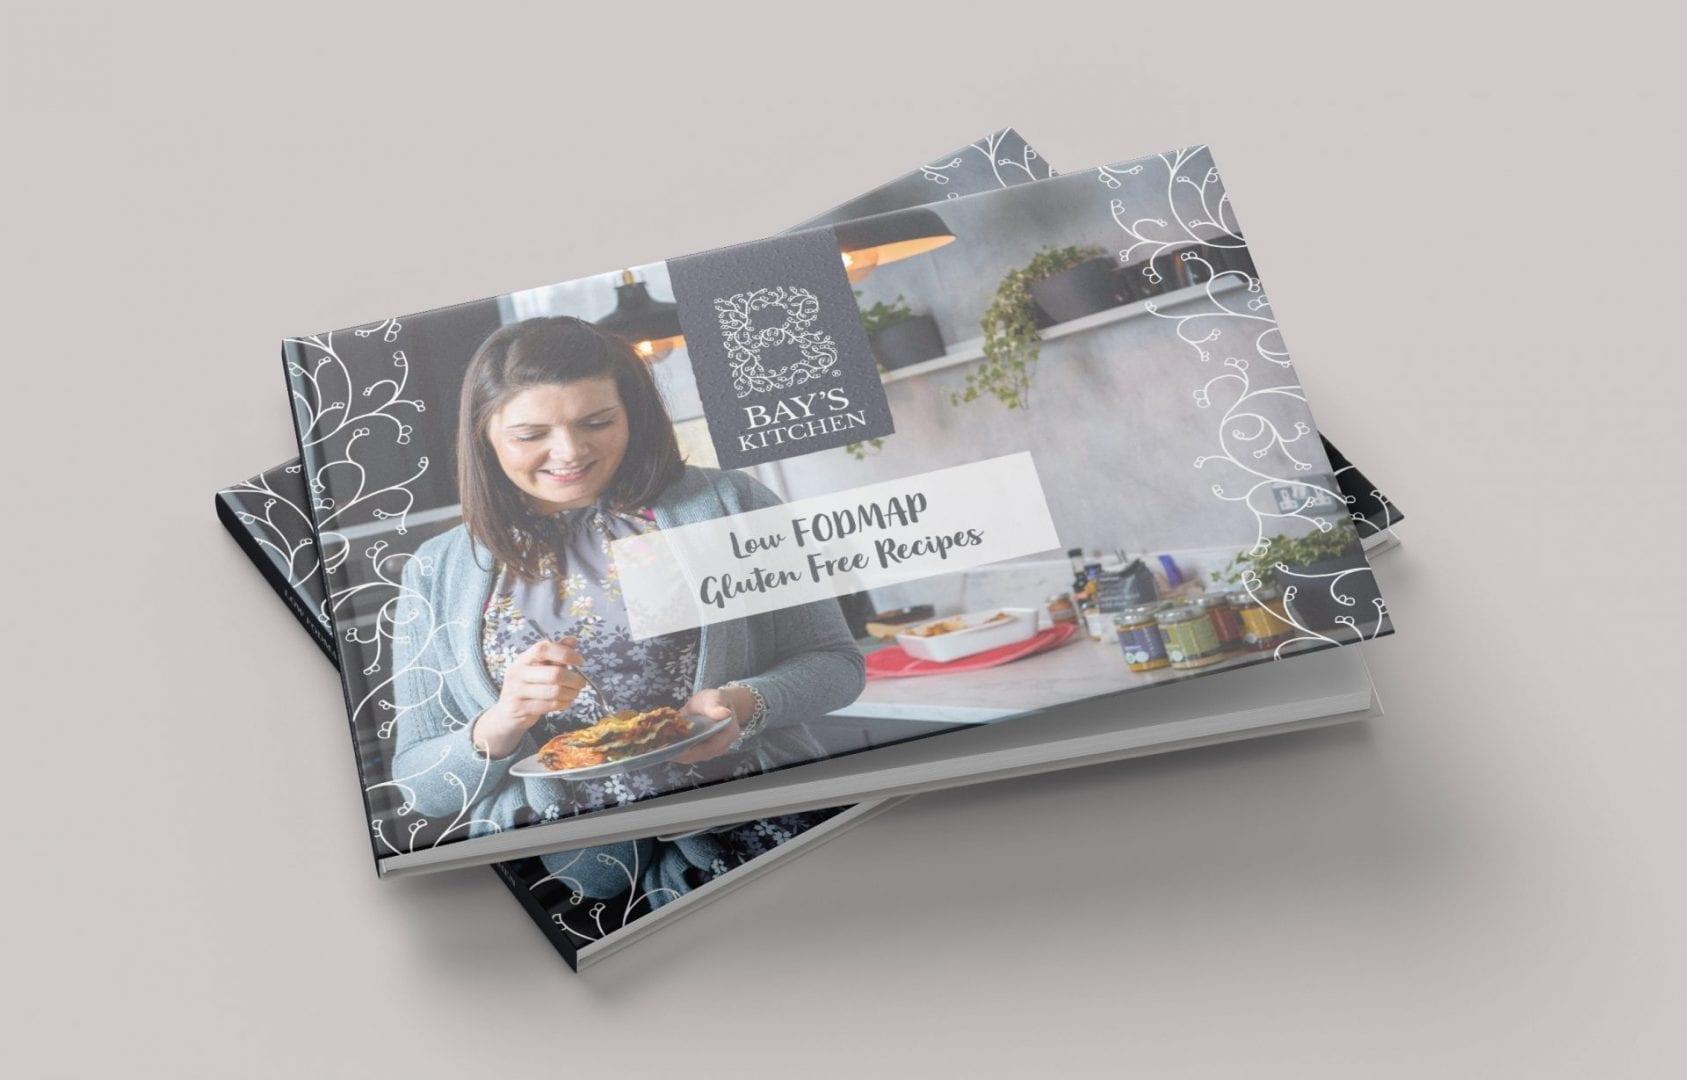 The front cover of the Bay's Kitchen Low FODMAP and gluten free recipe book